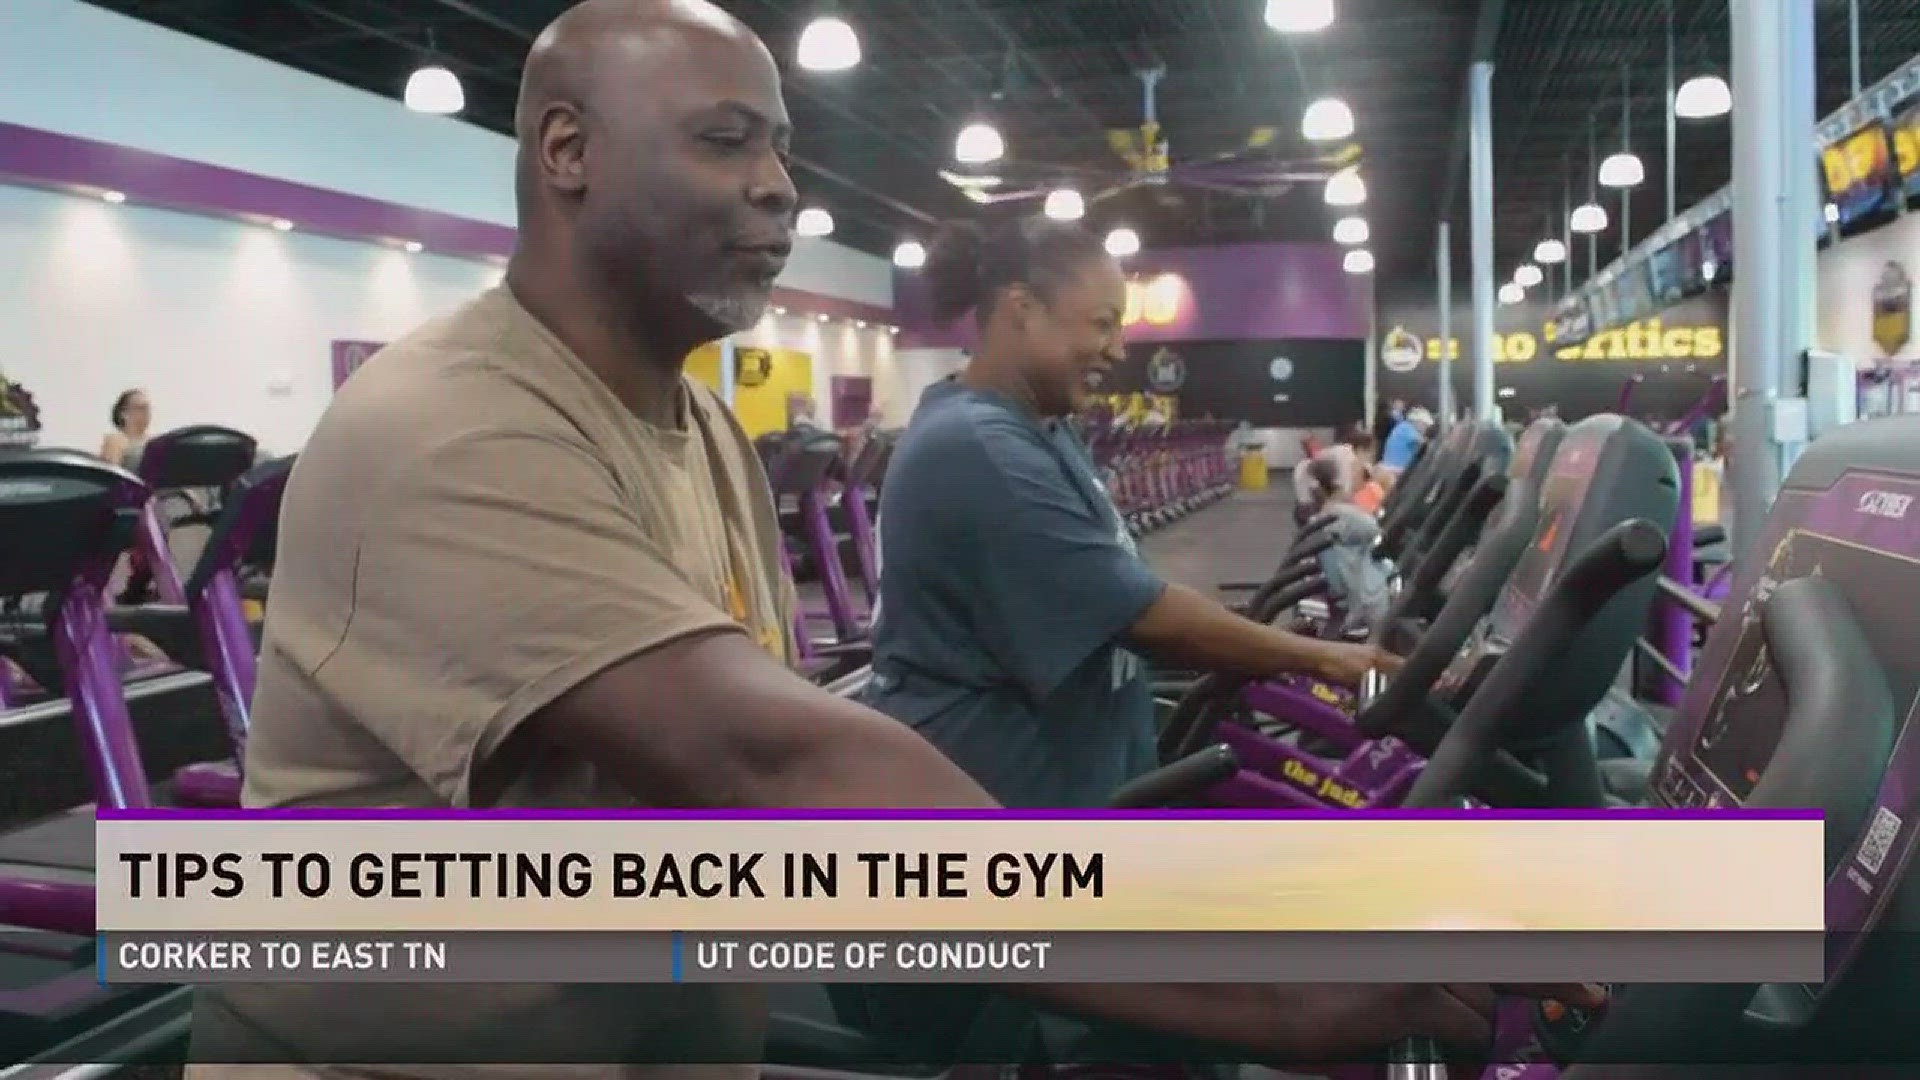 As the summer winds down and the kids head back to school, it's time to head back to the gym!